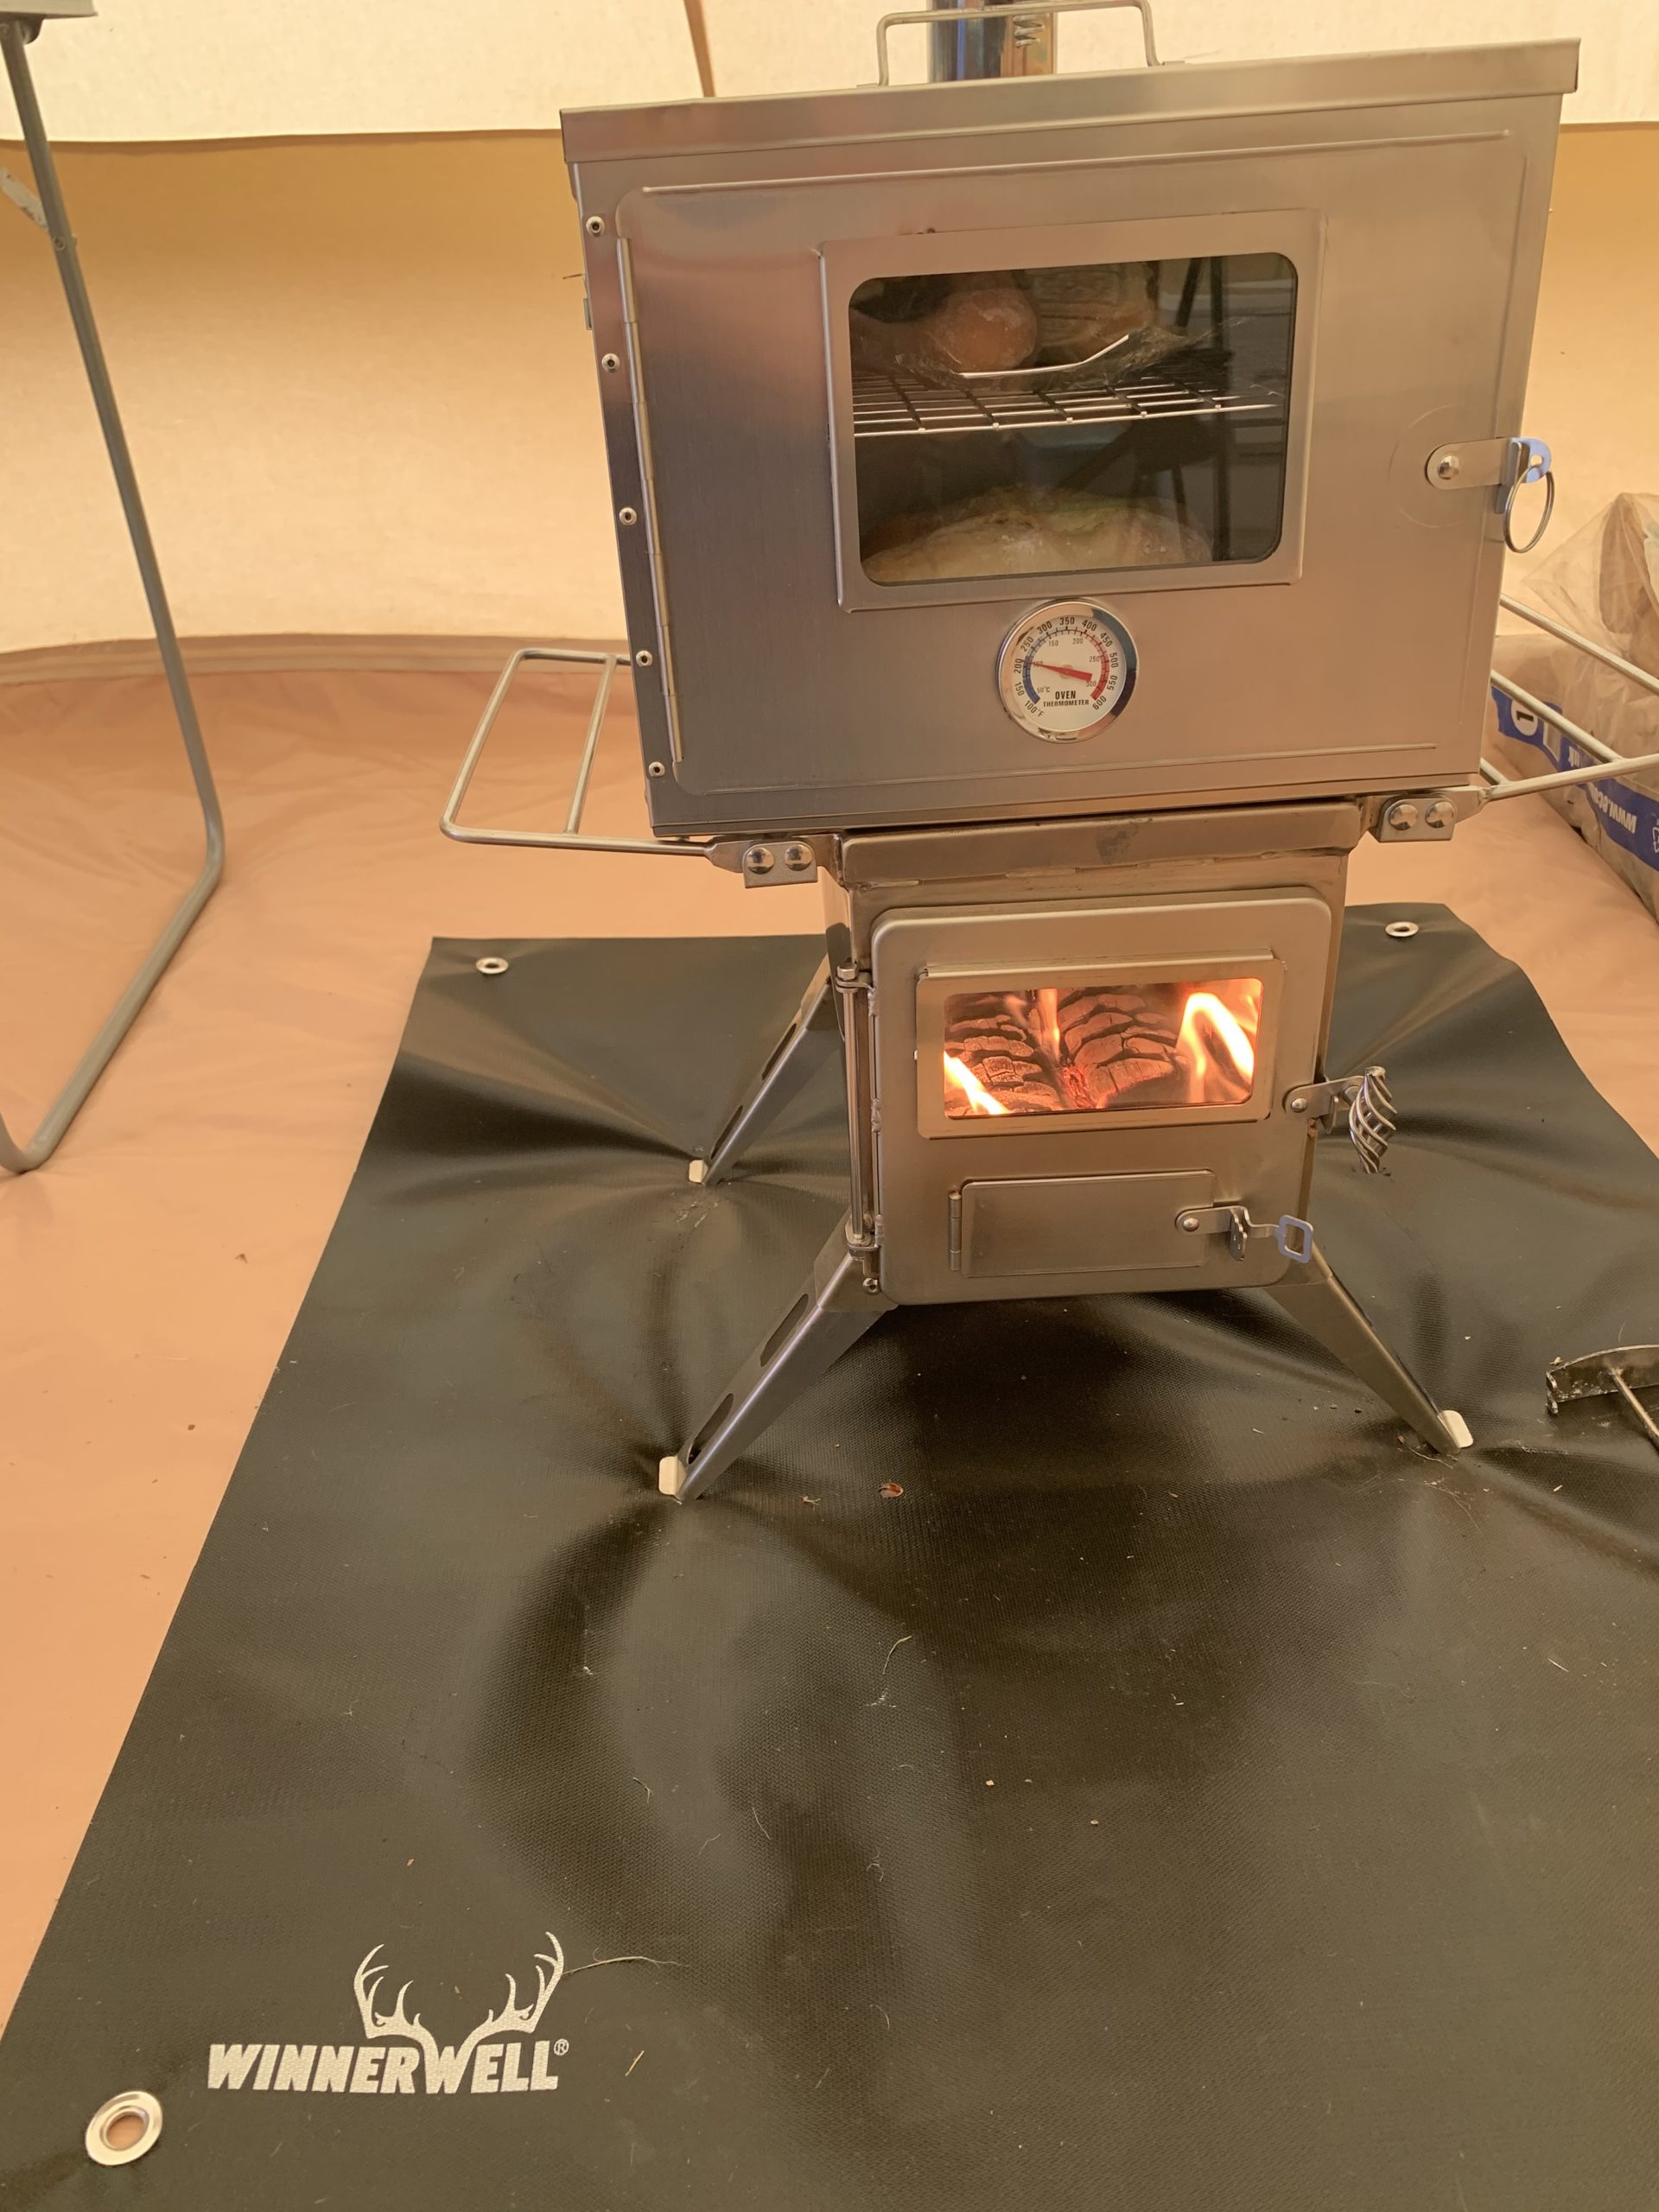 Winnerwell Nomad Wood Burning Camping Cooker & Stove - Review